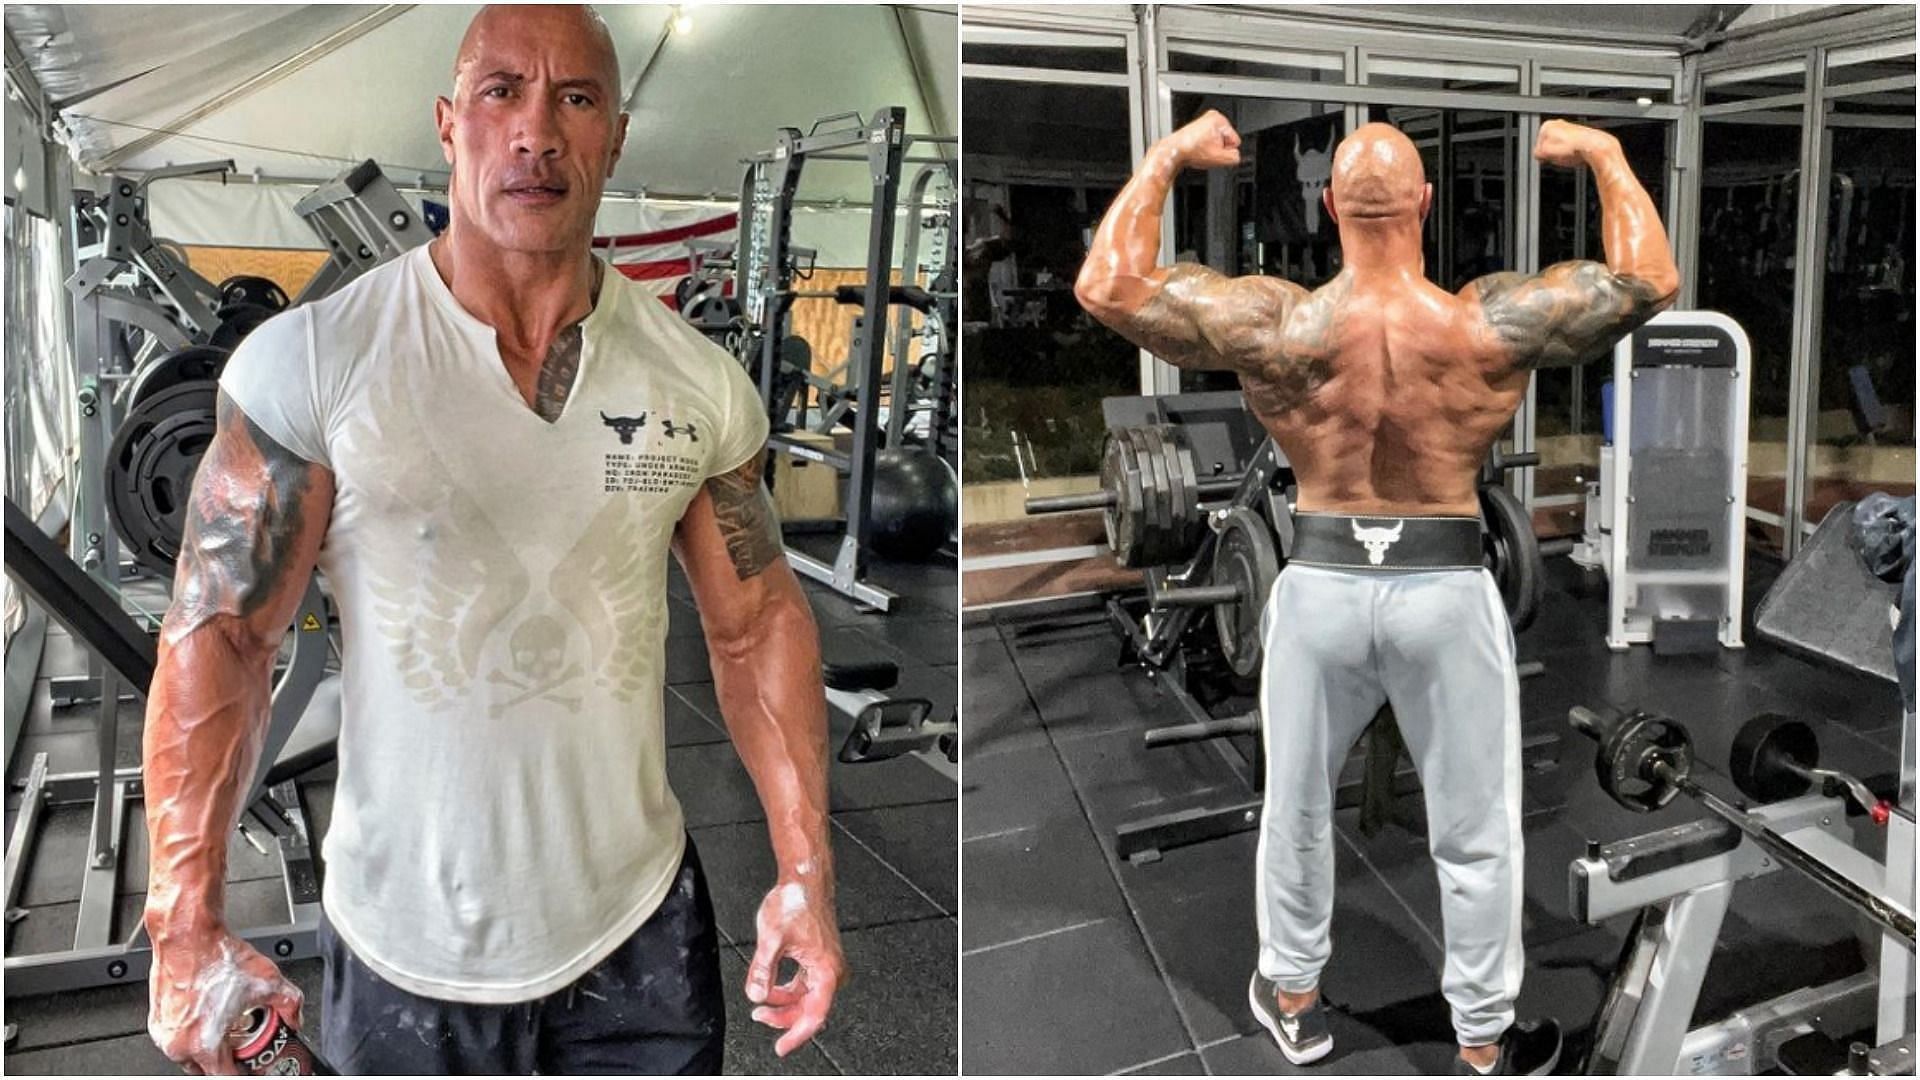 The shoulder dumbbell raise finisher dropset devised by The Rock presents a plethora of benefits. (Image via instagram/ The rock)